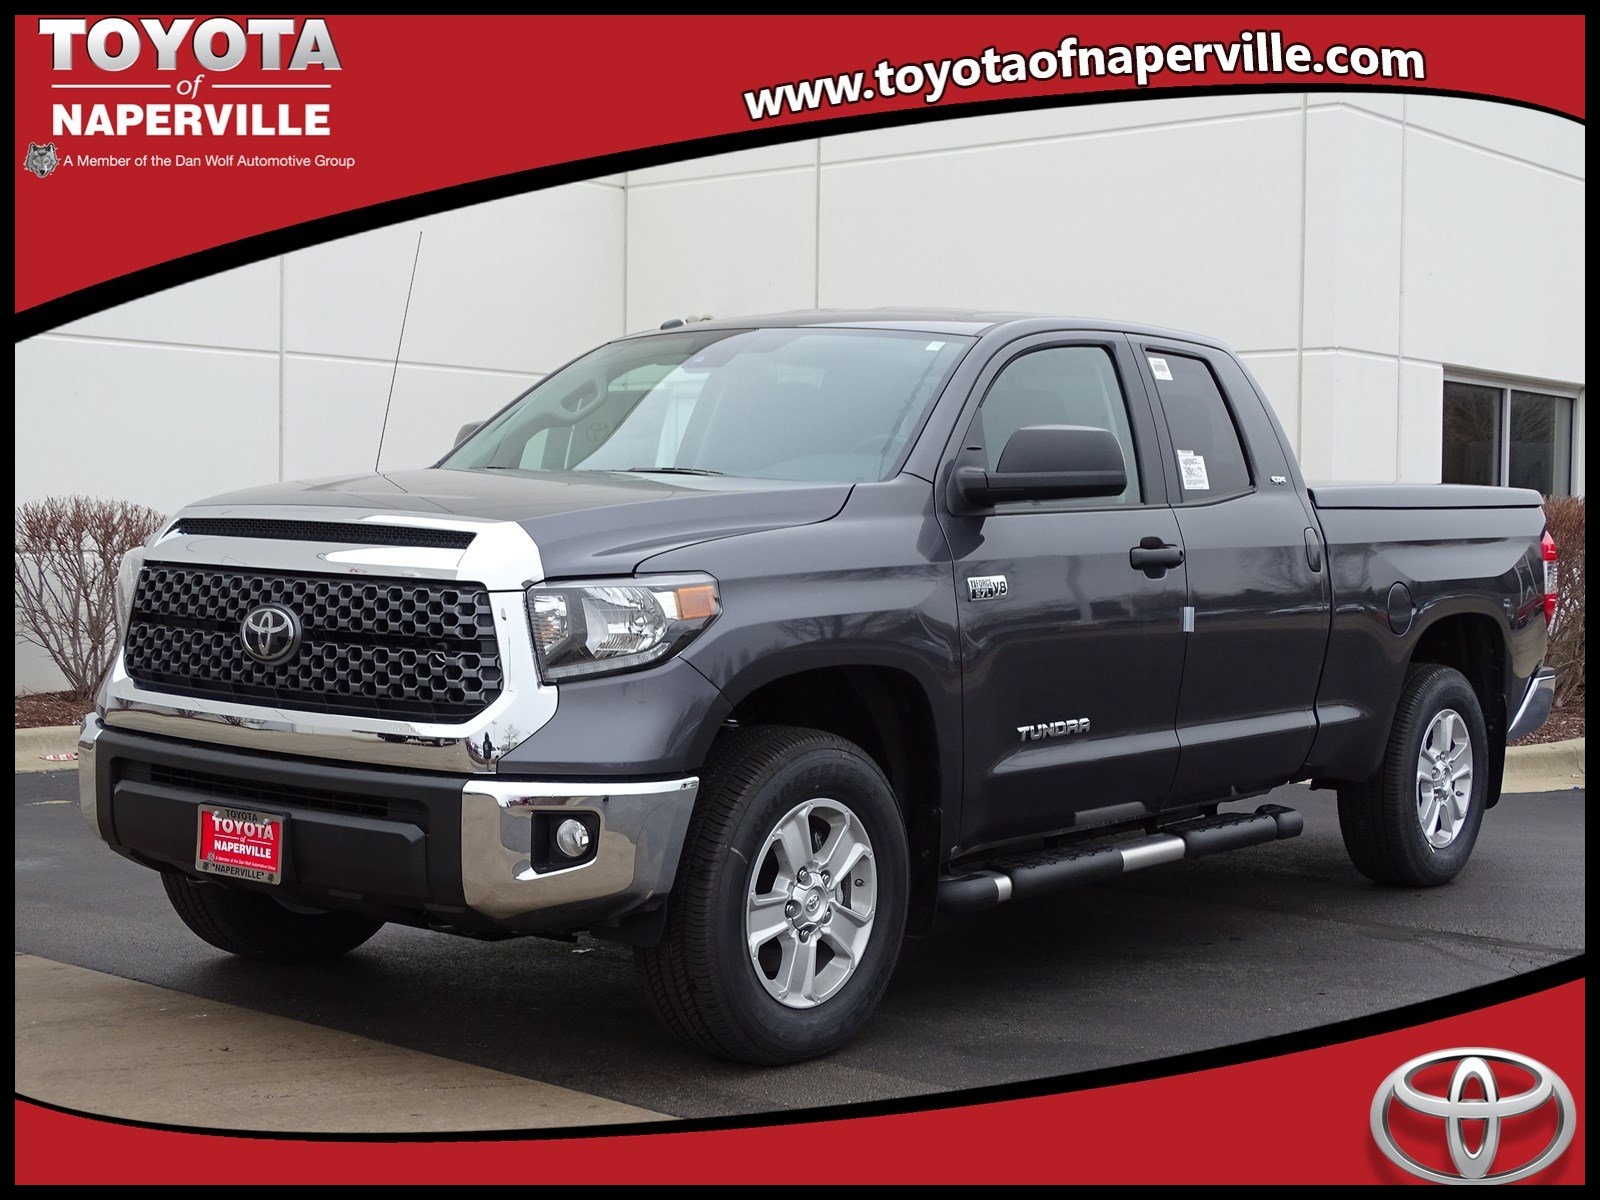 New 2018 toyota Tundra Sr5 4d Double Cab In Naperville T Price